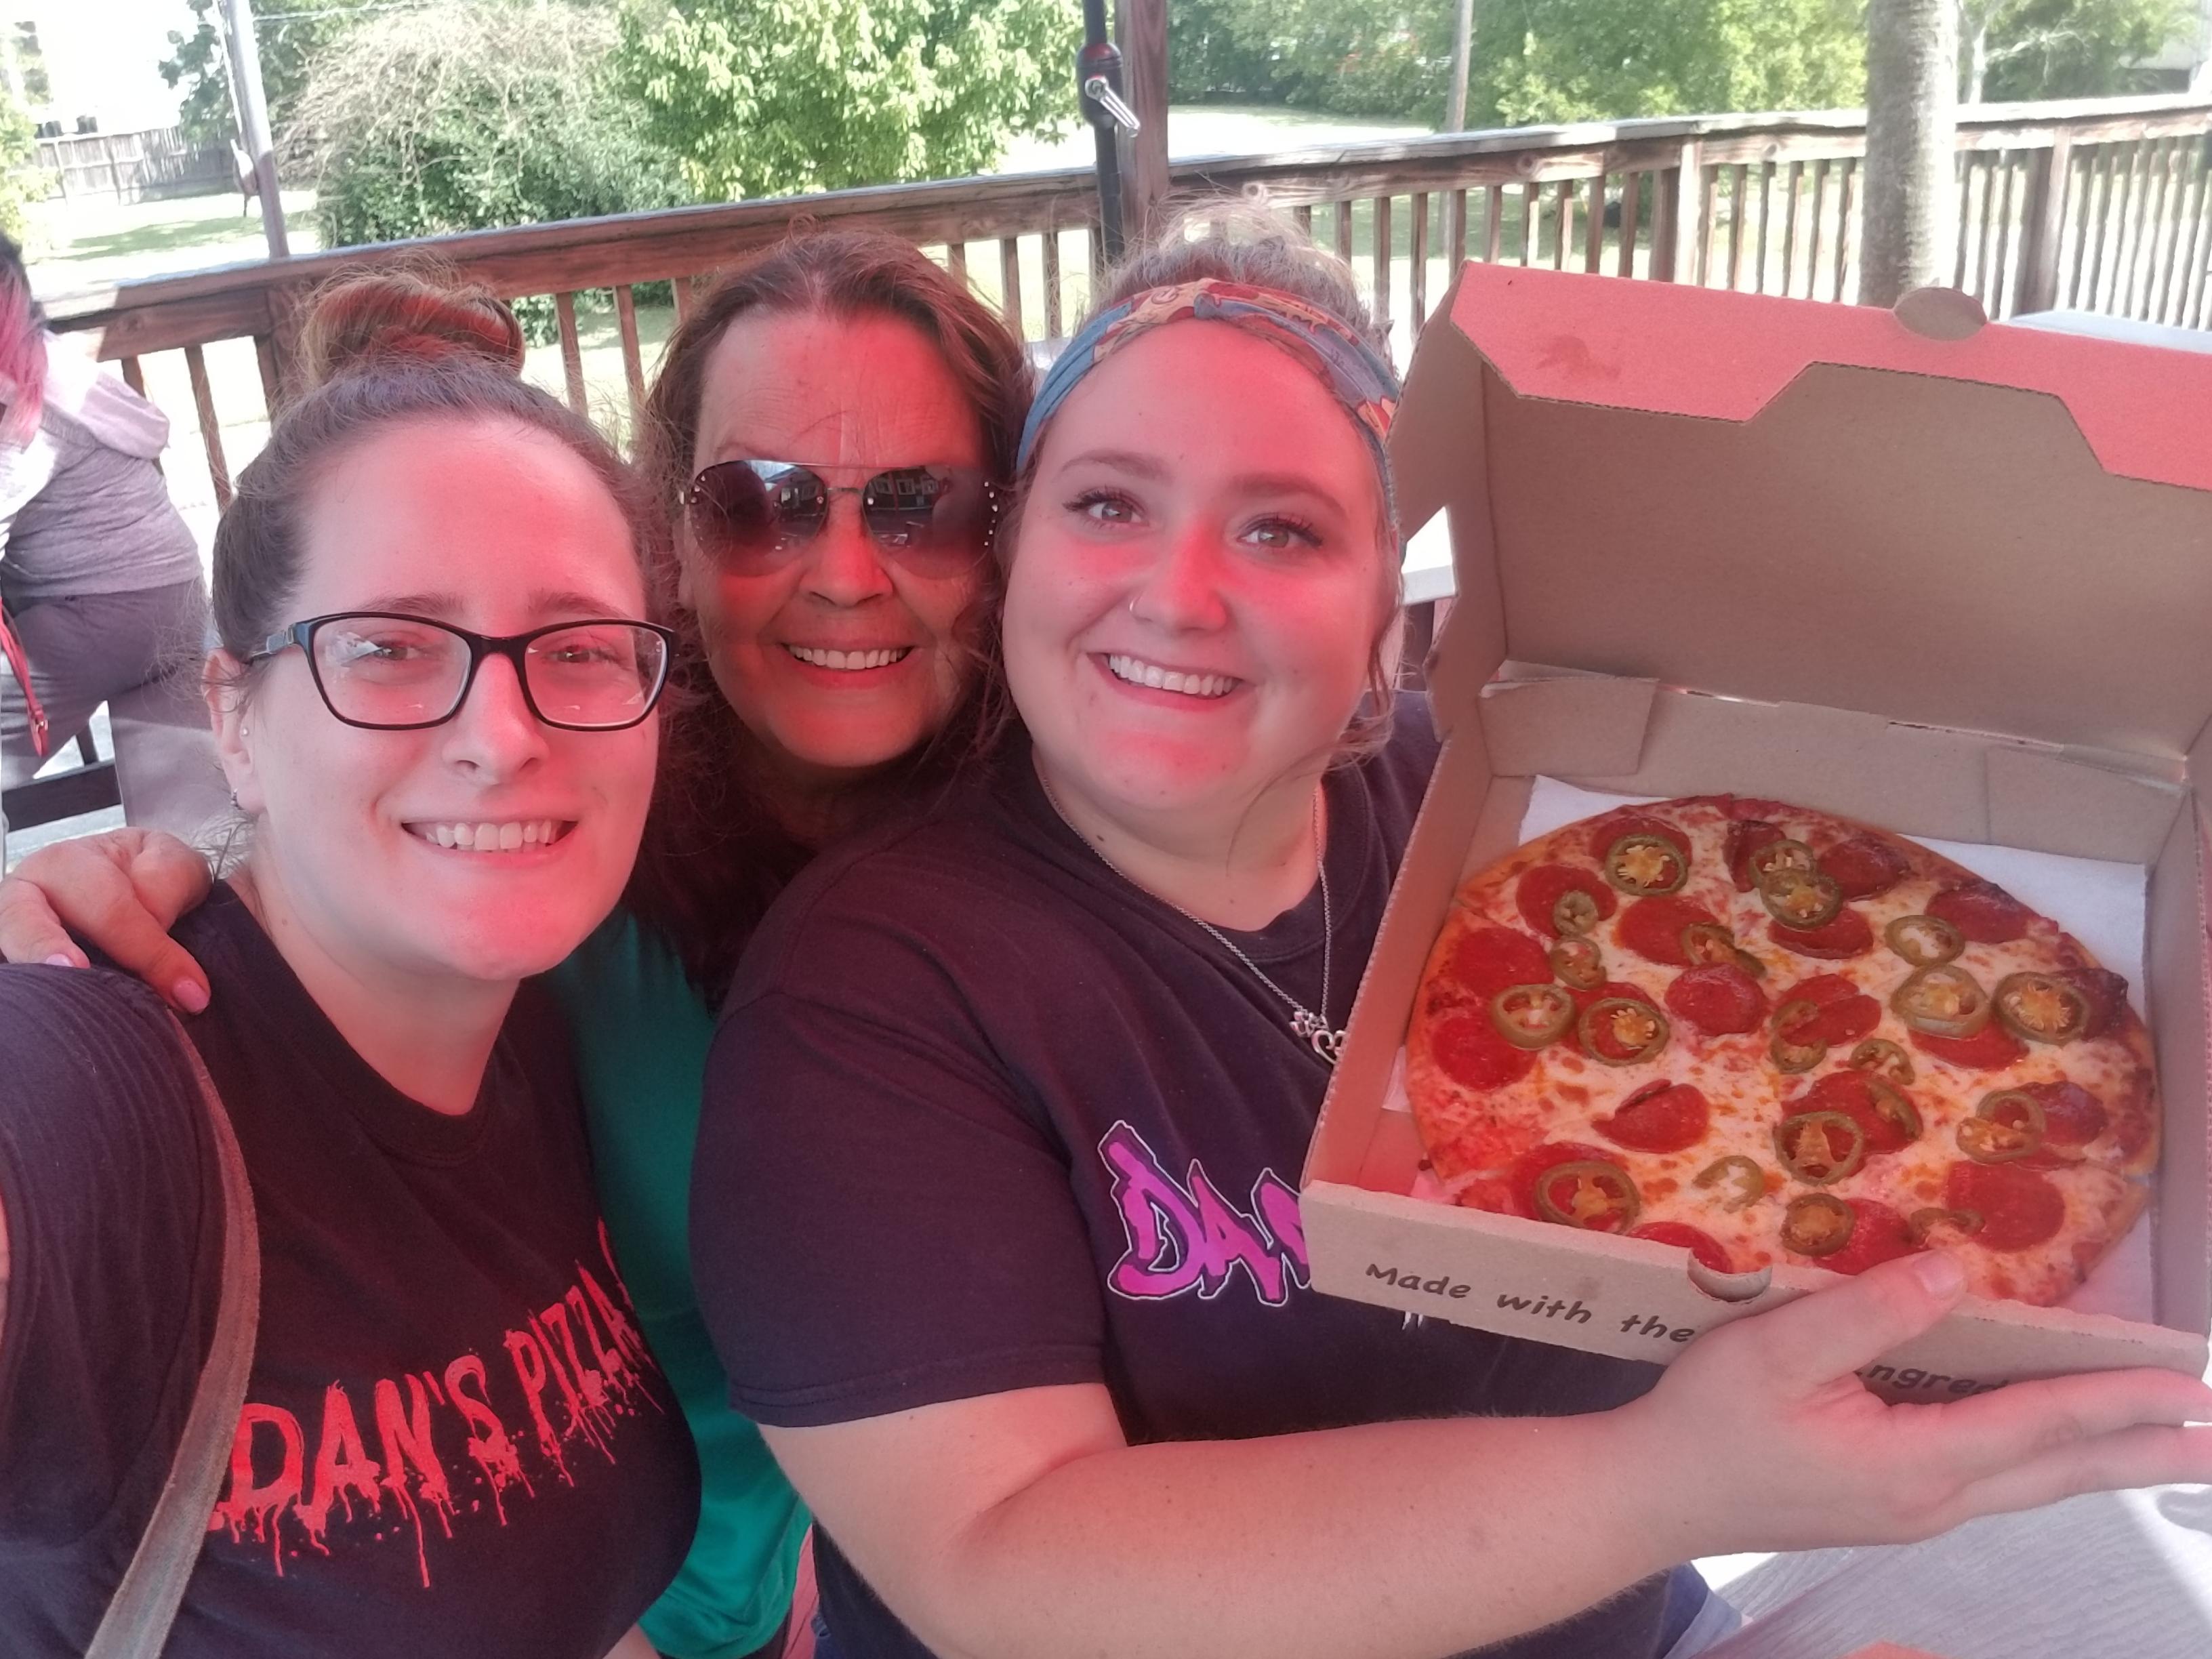 Gather with friends to enjoy Dan's Pizza the way you want it! The way it should be!